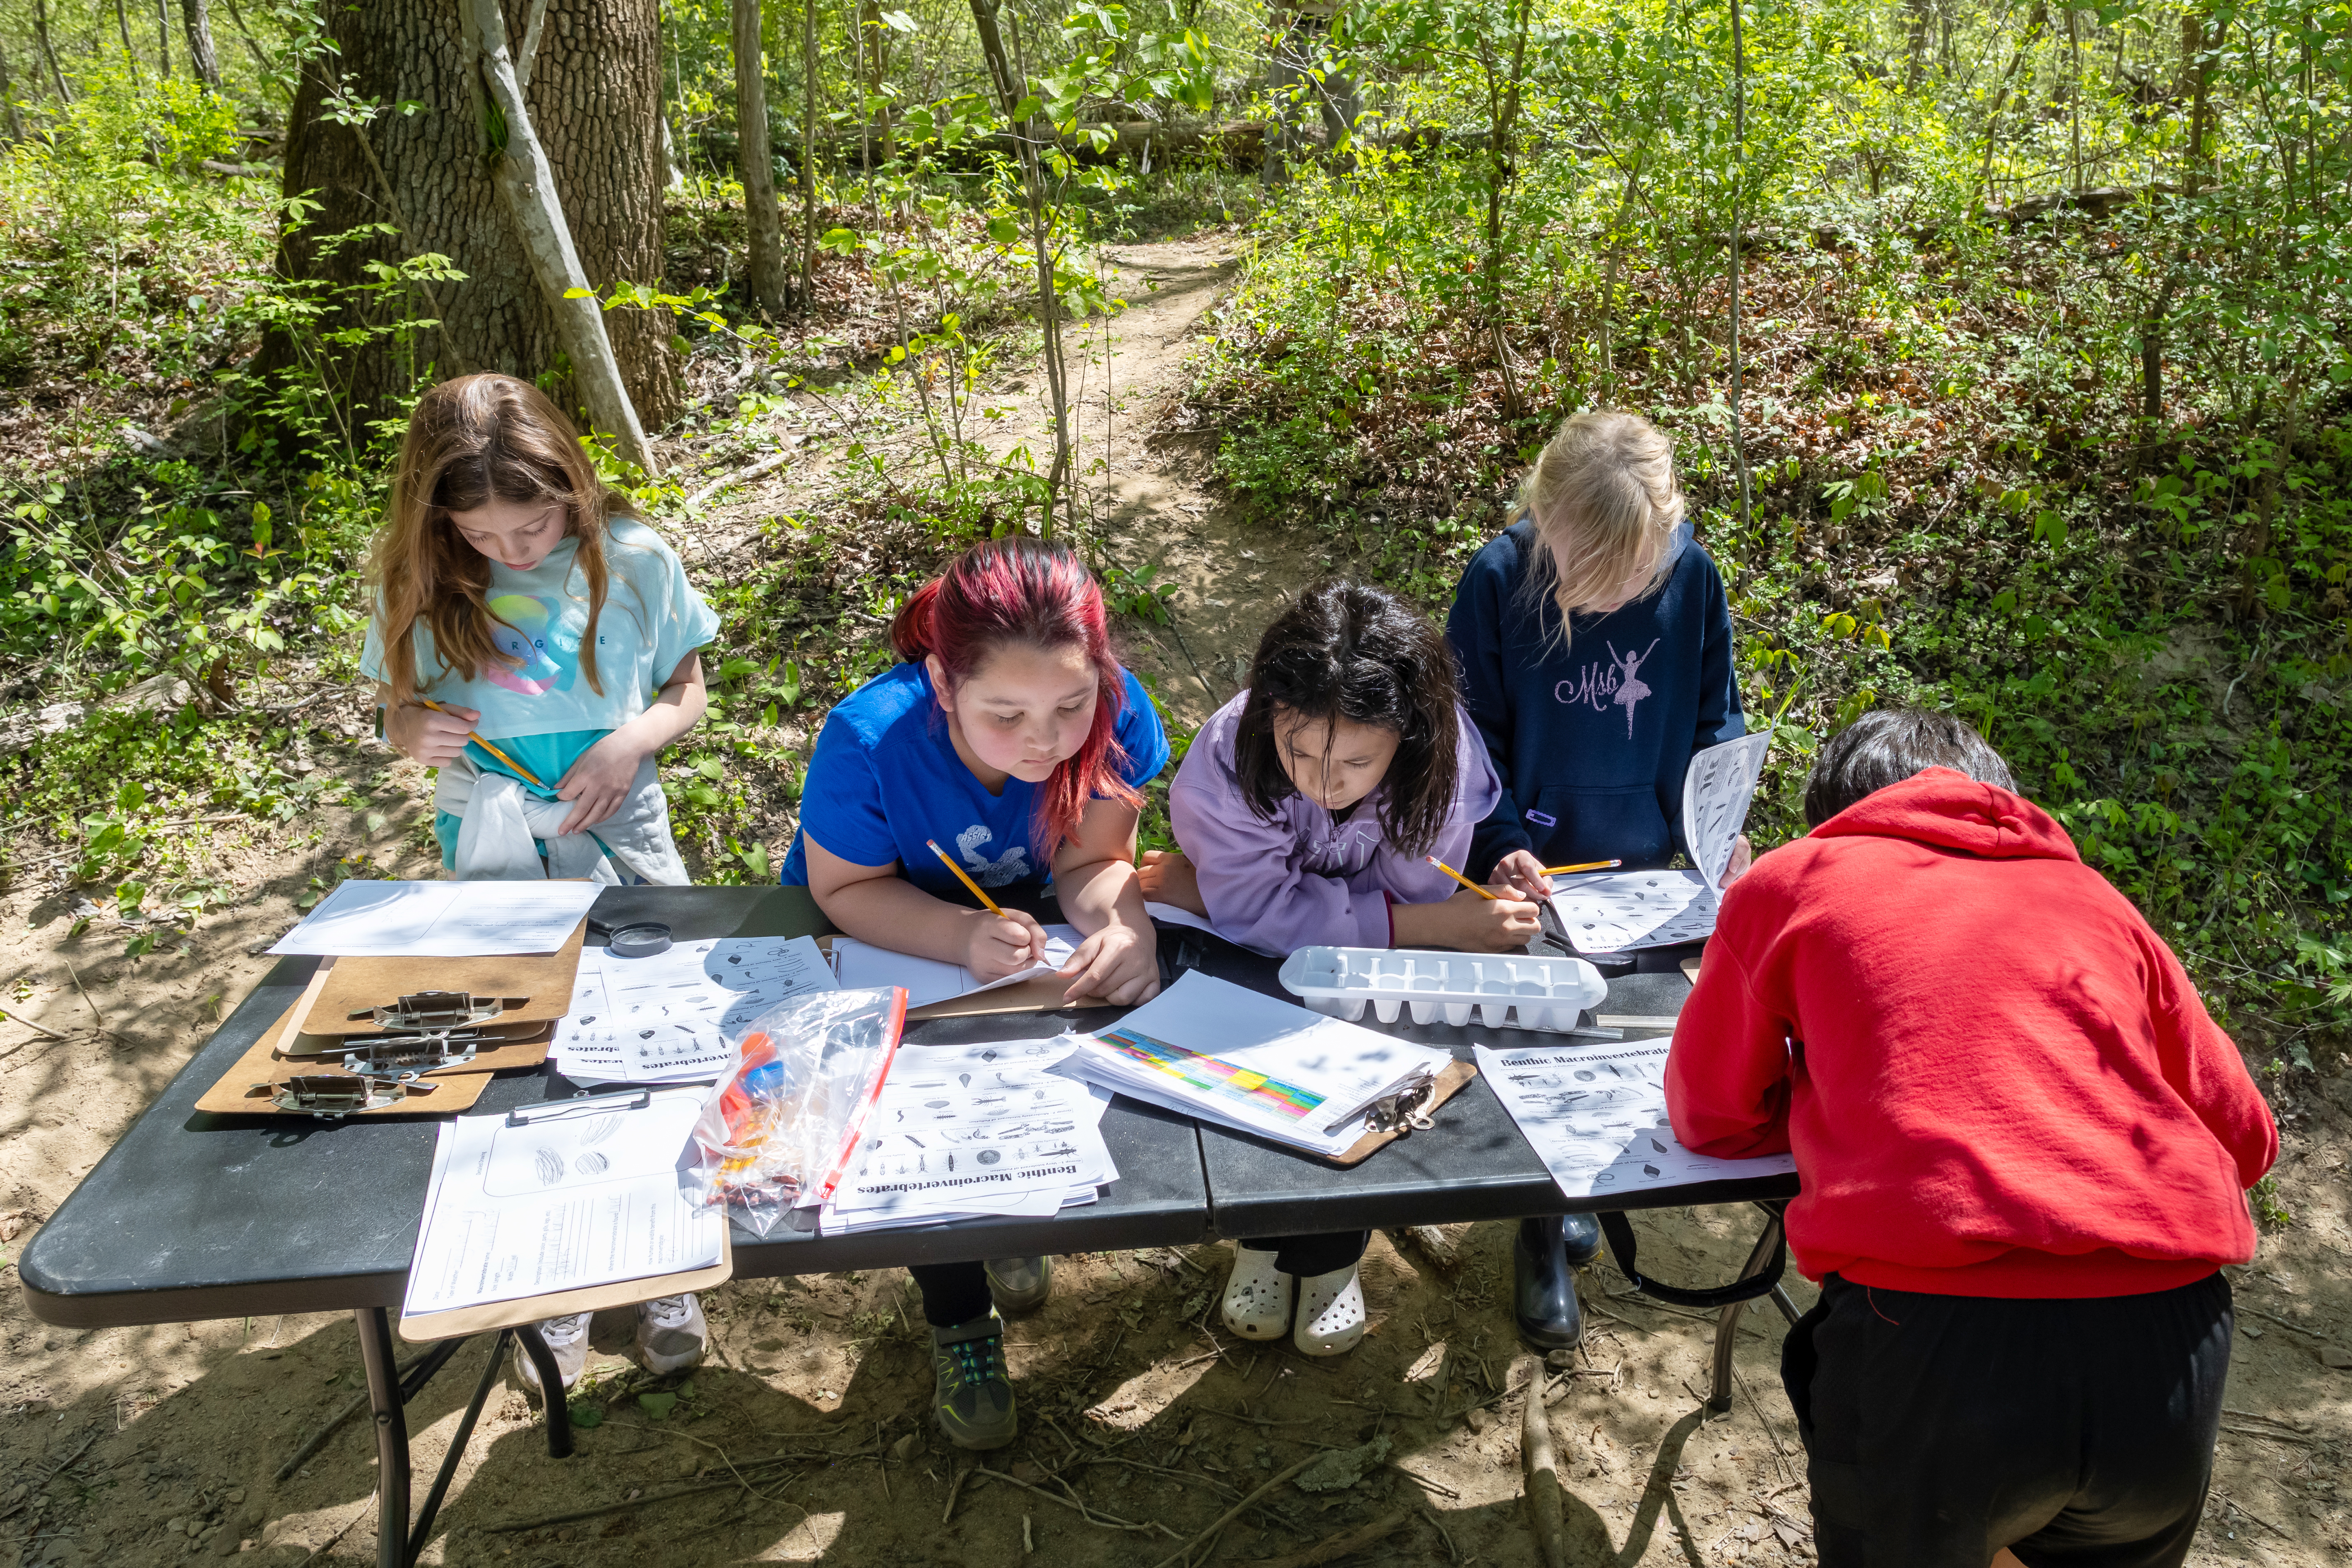 Students hunch over a folding table as they sketch microinvertebrates on paper attached to clipboards.